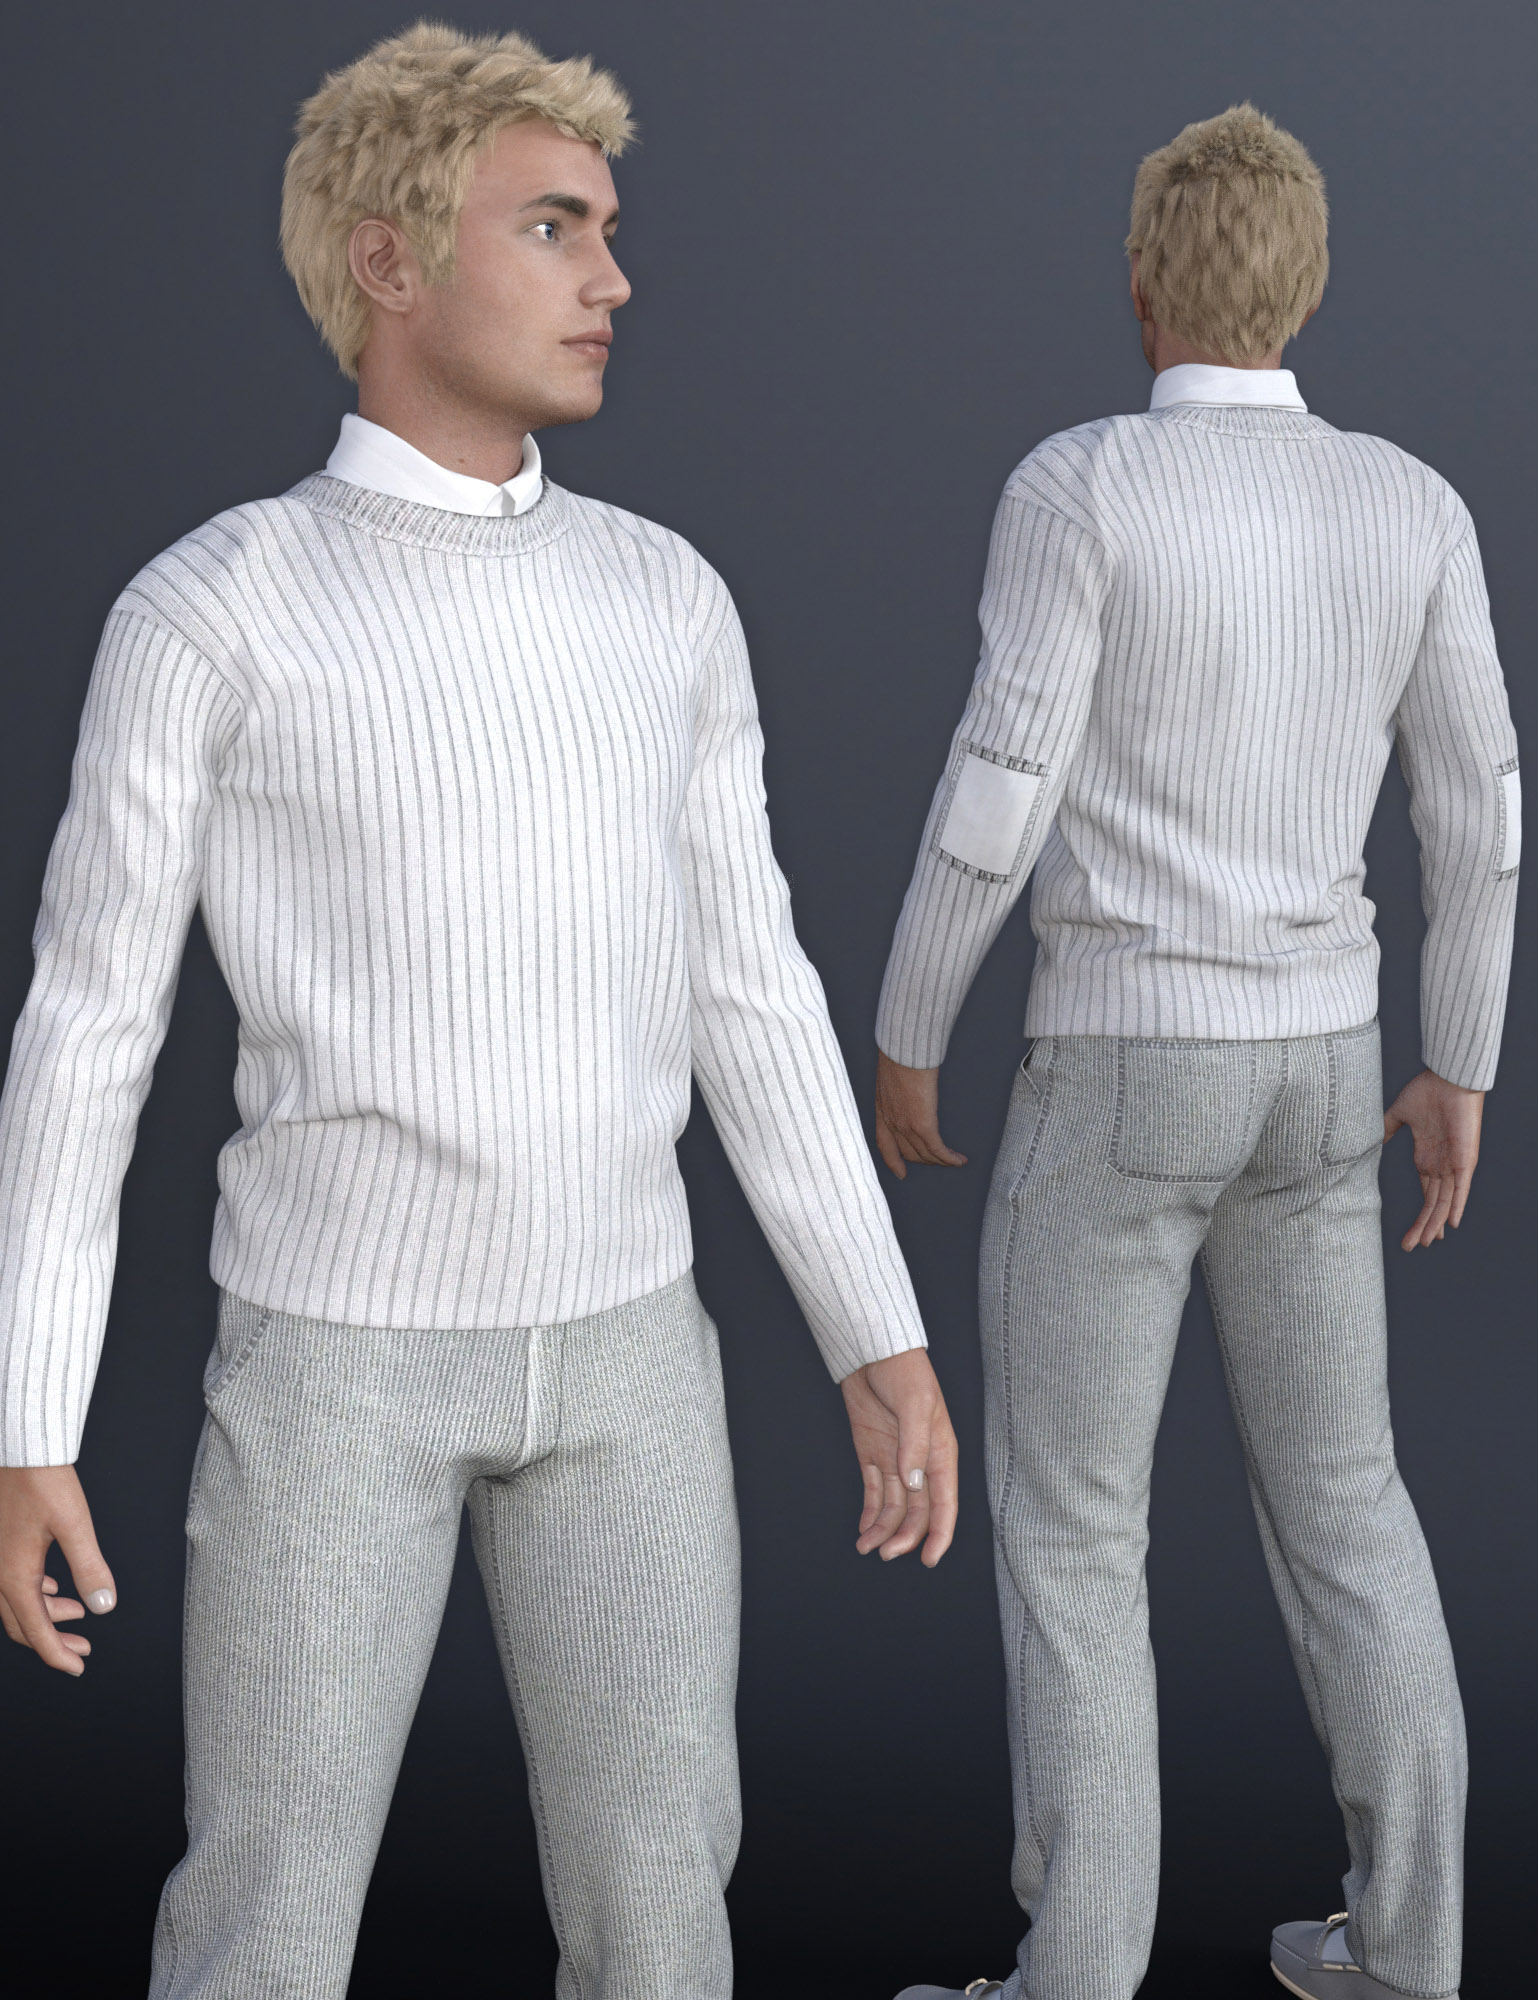 European Clothes for Genesis 3 Male(s) by: Oskarsson, 3D Models by Daz 3D